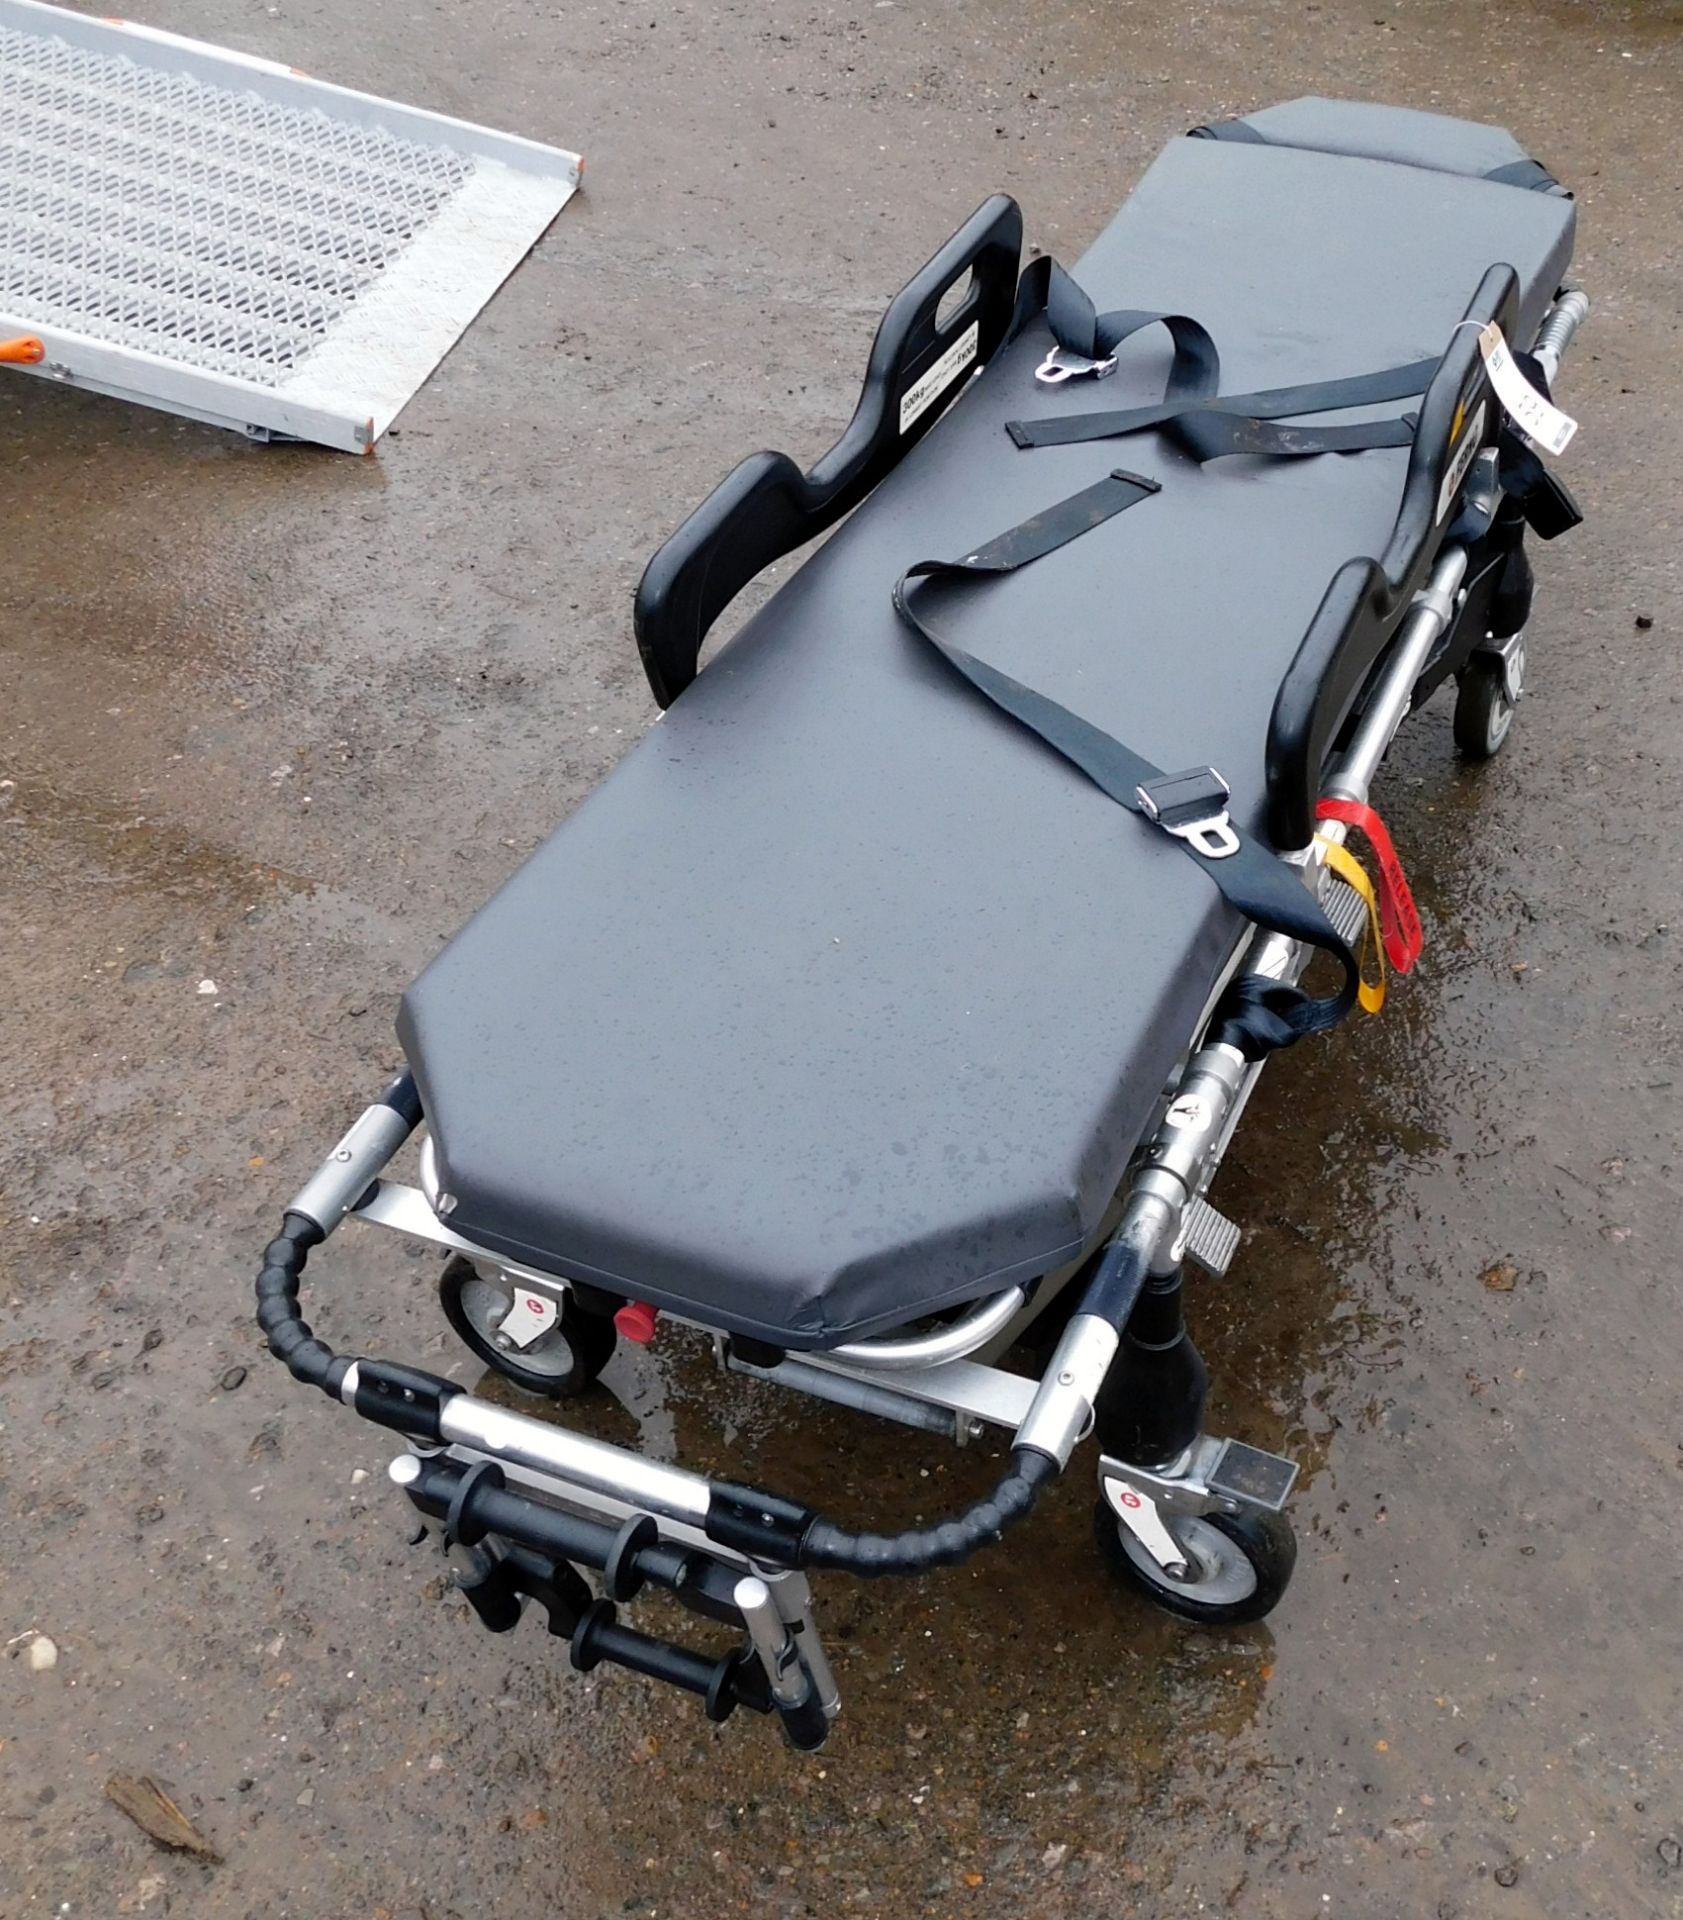 Ferno Pegasus Stretcher s/n PEG 6200 (2014), Lift Count 1837 (Stored on Lot 27) (Located South - Image 4 of 5